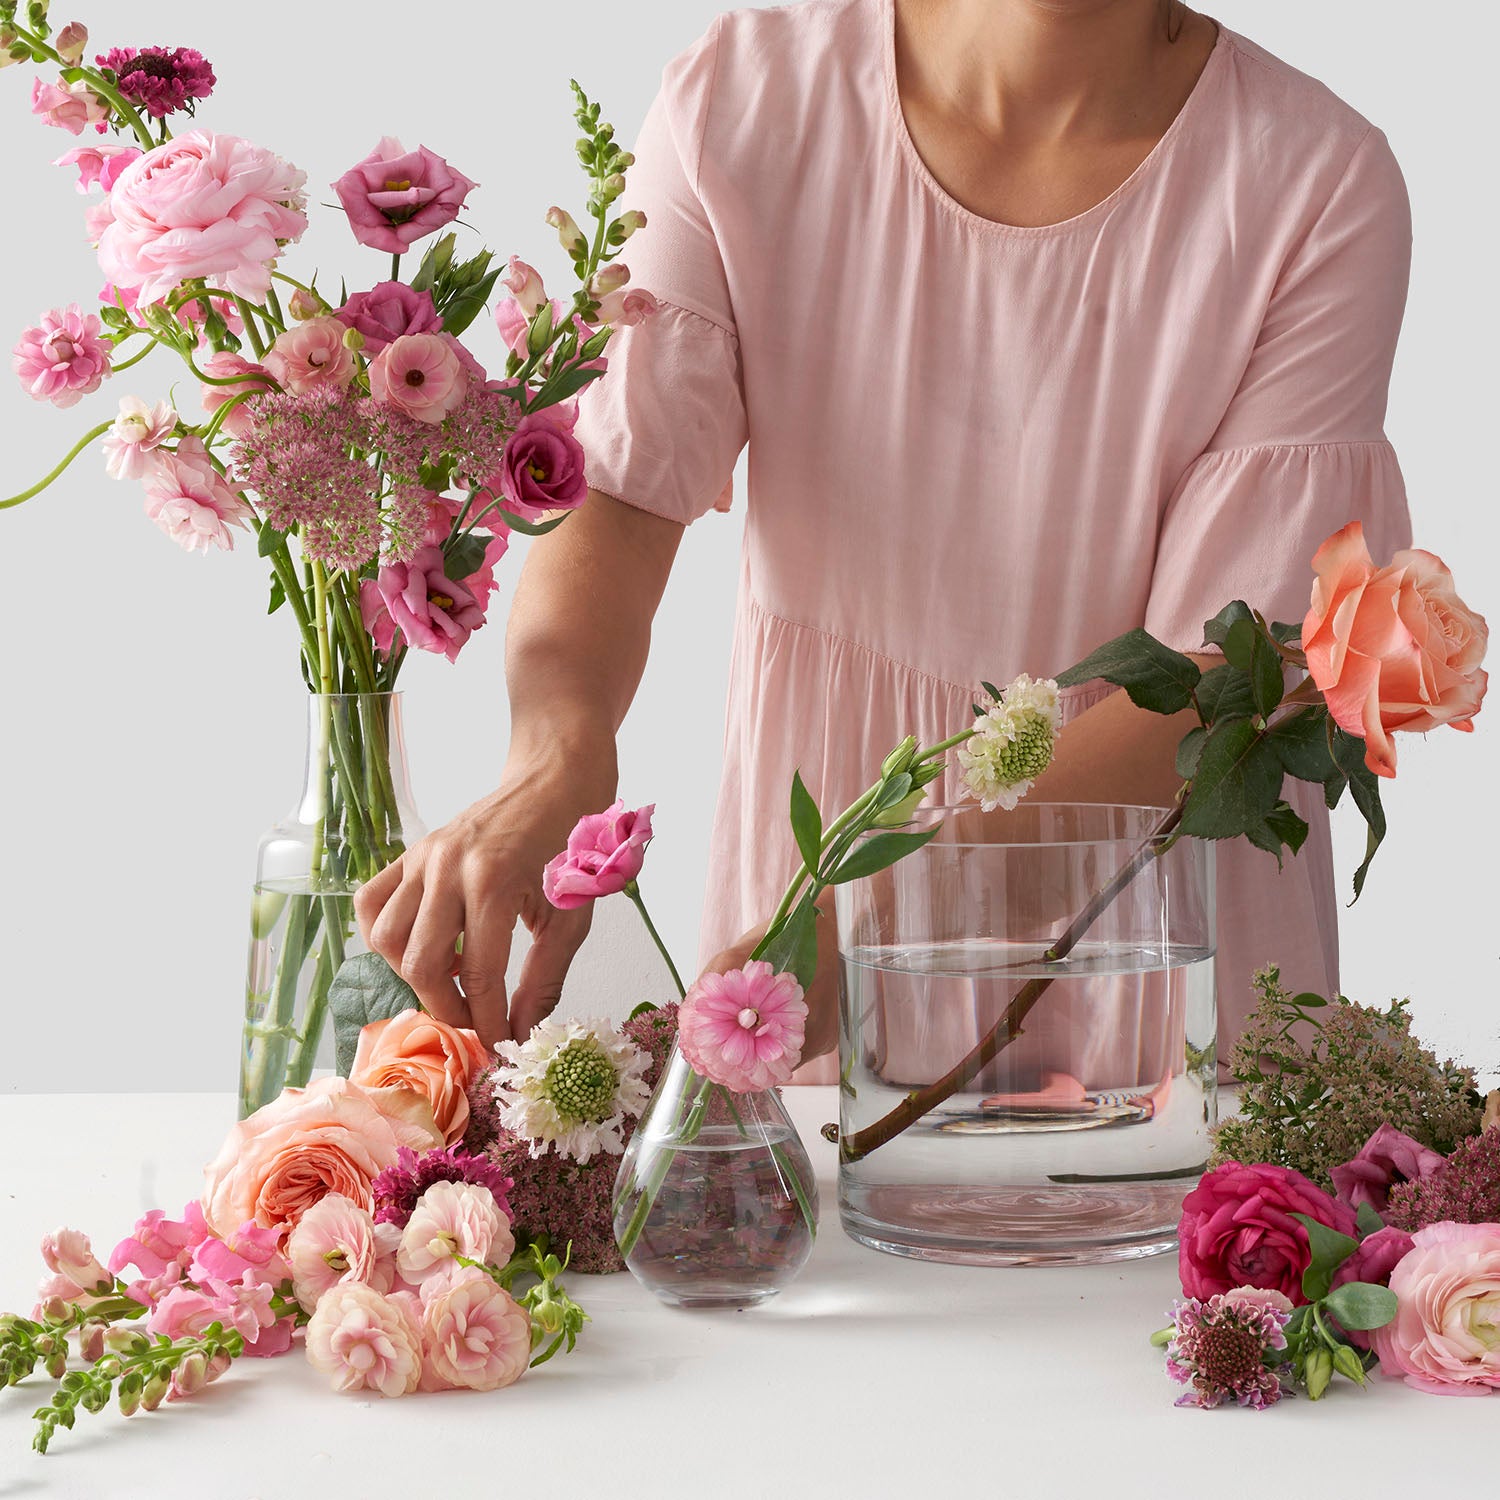 Woman in pink dress standing behind white table. Table holds clear three glass vases filled with water and bunches of pastel coloured flowers, including roses, lisianthus, ranunculus and snapdragons. 